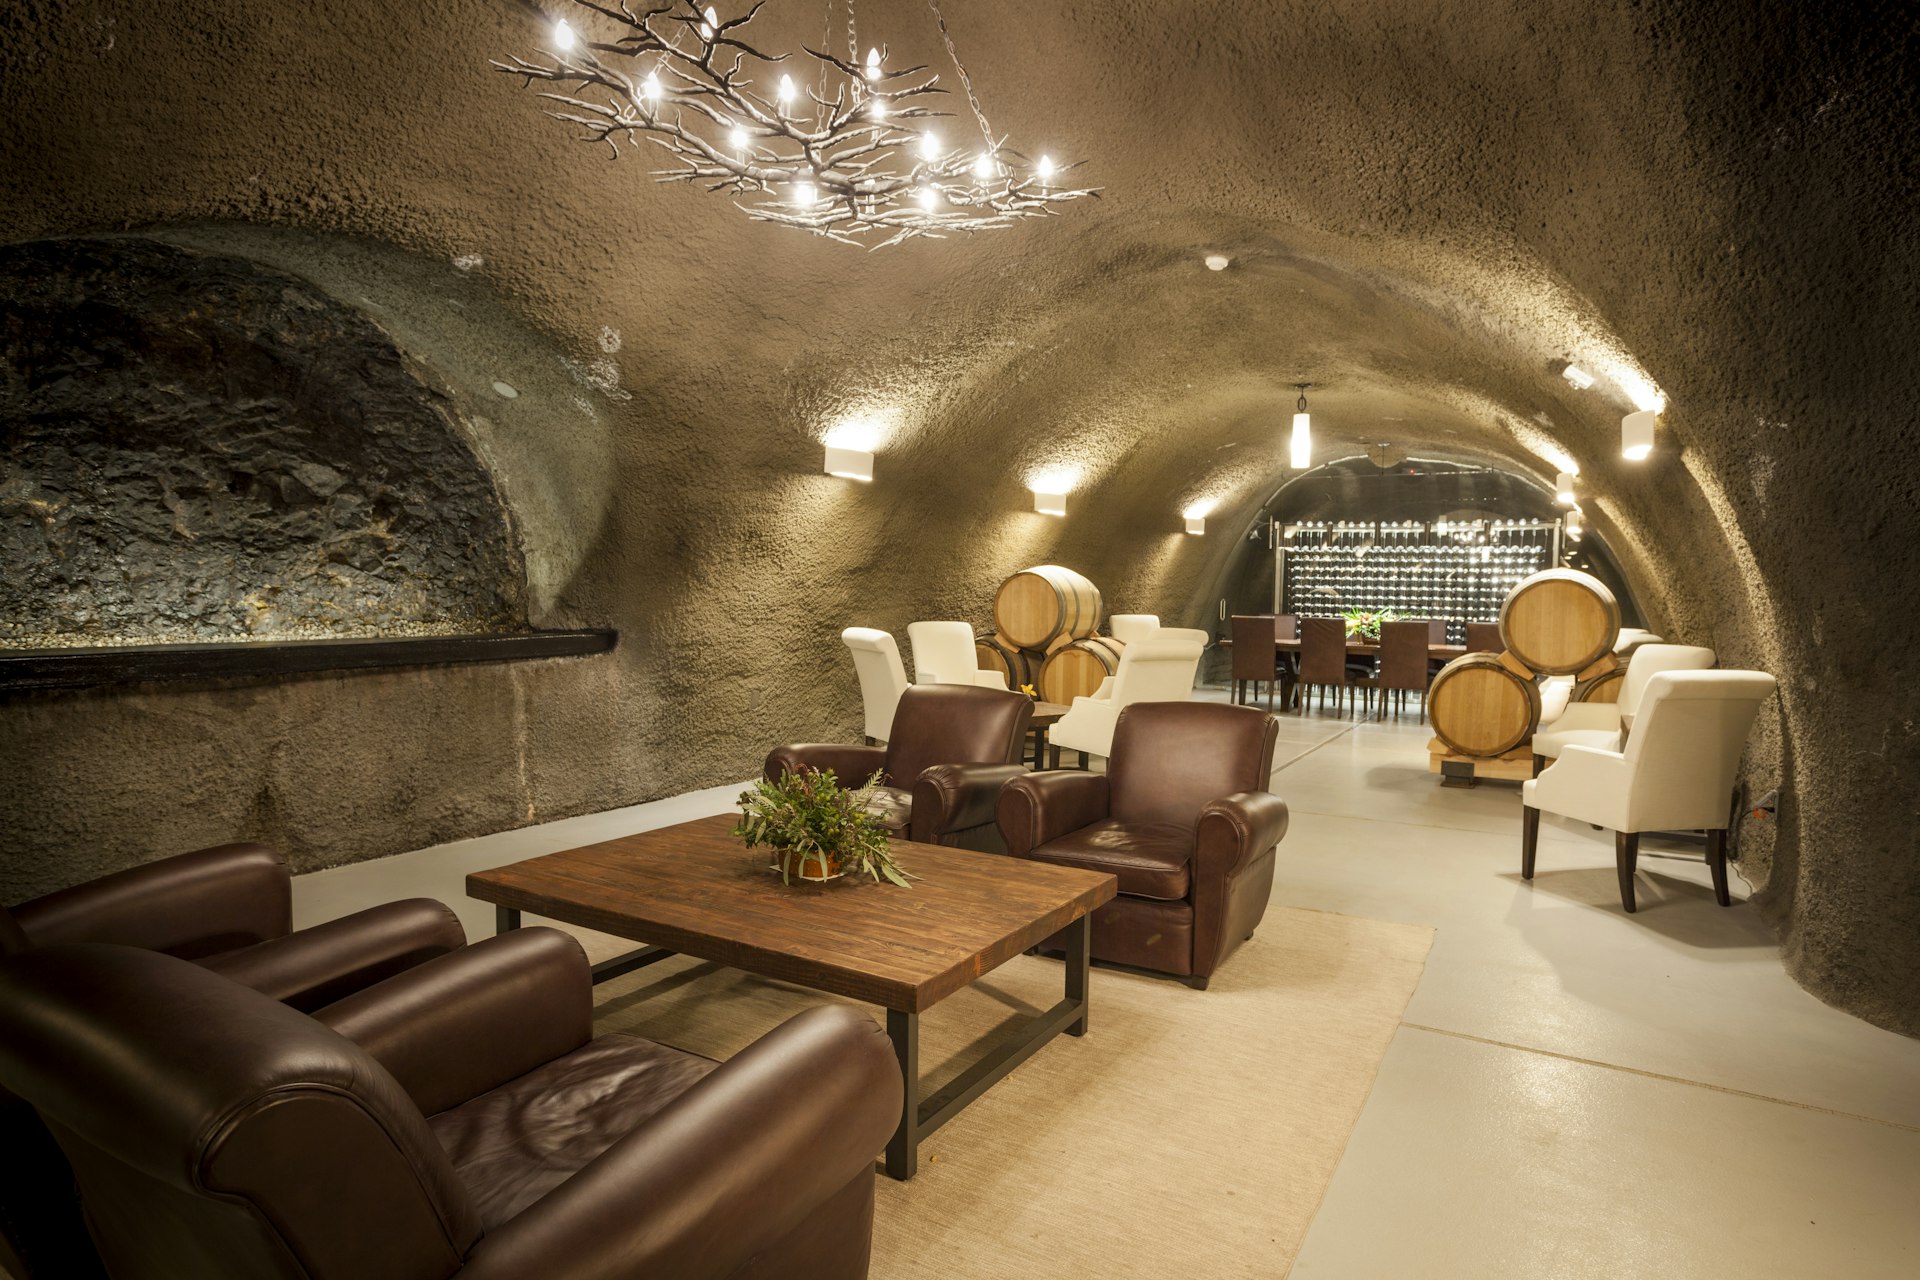 Inside an underground lounge room, with wine barrels and leather seats